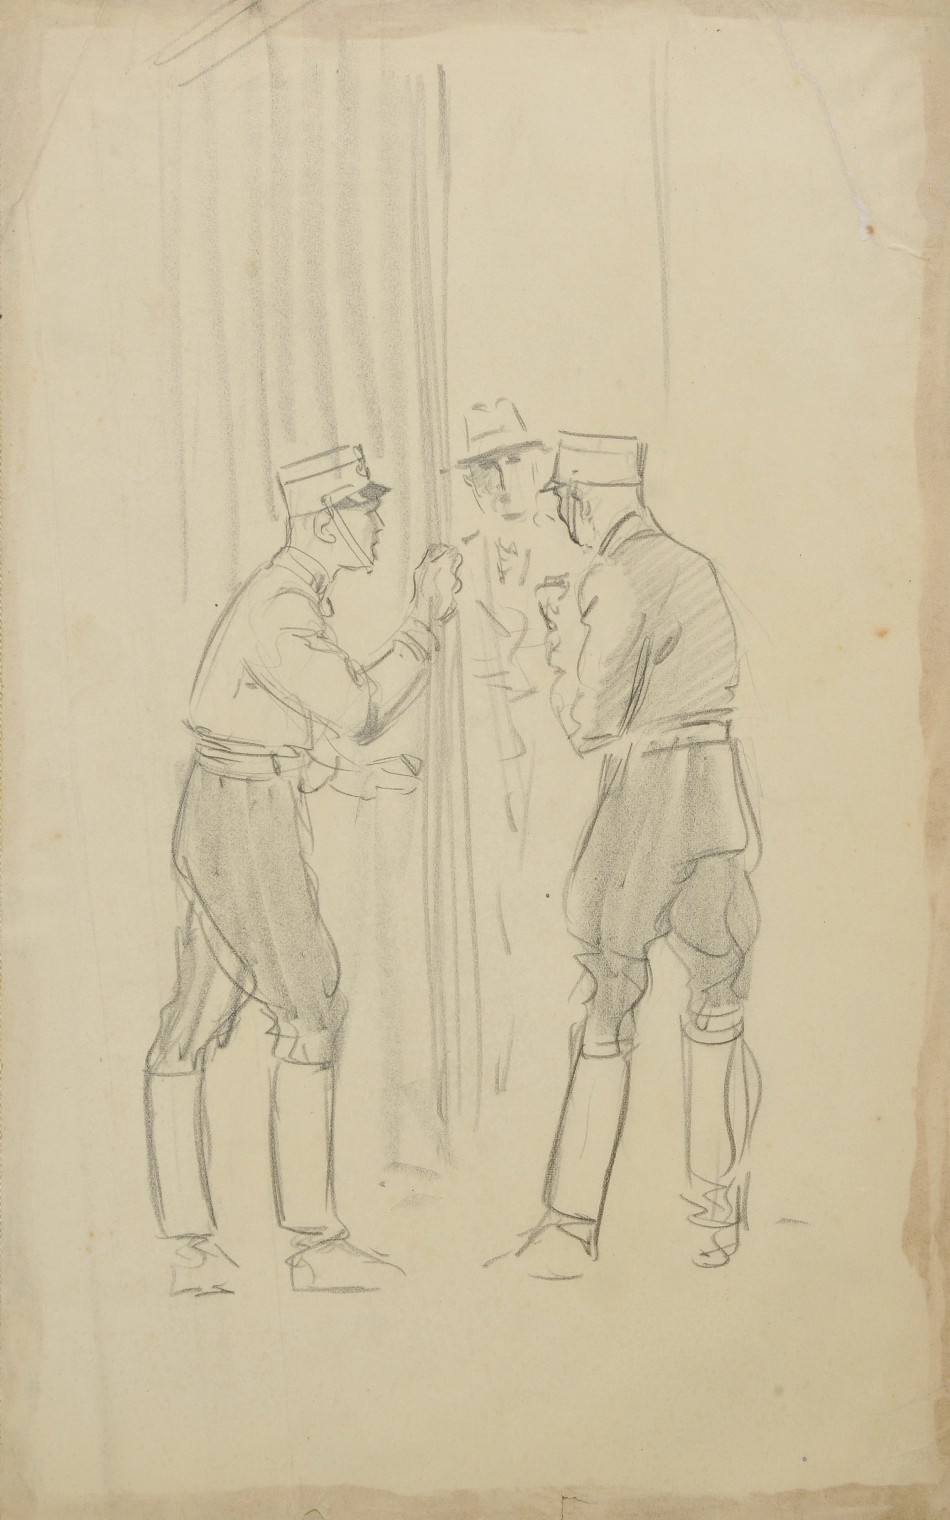 This sketch shows two Nazis opening a curtain to a civilian